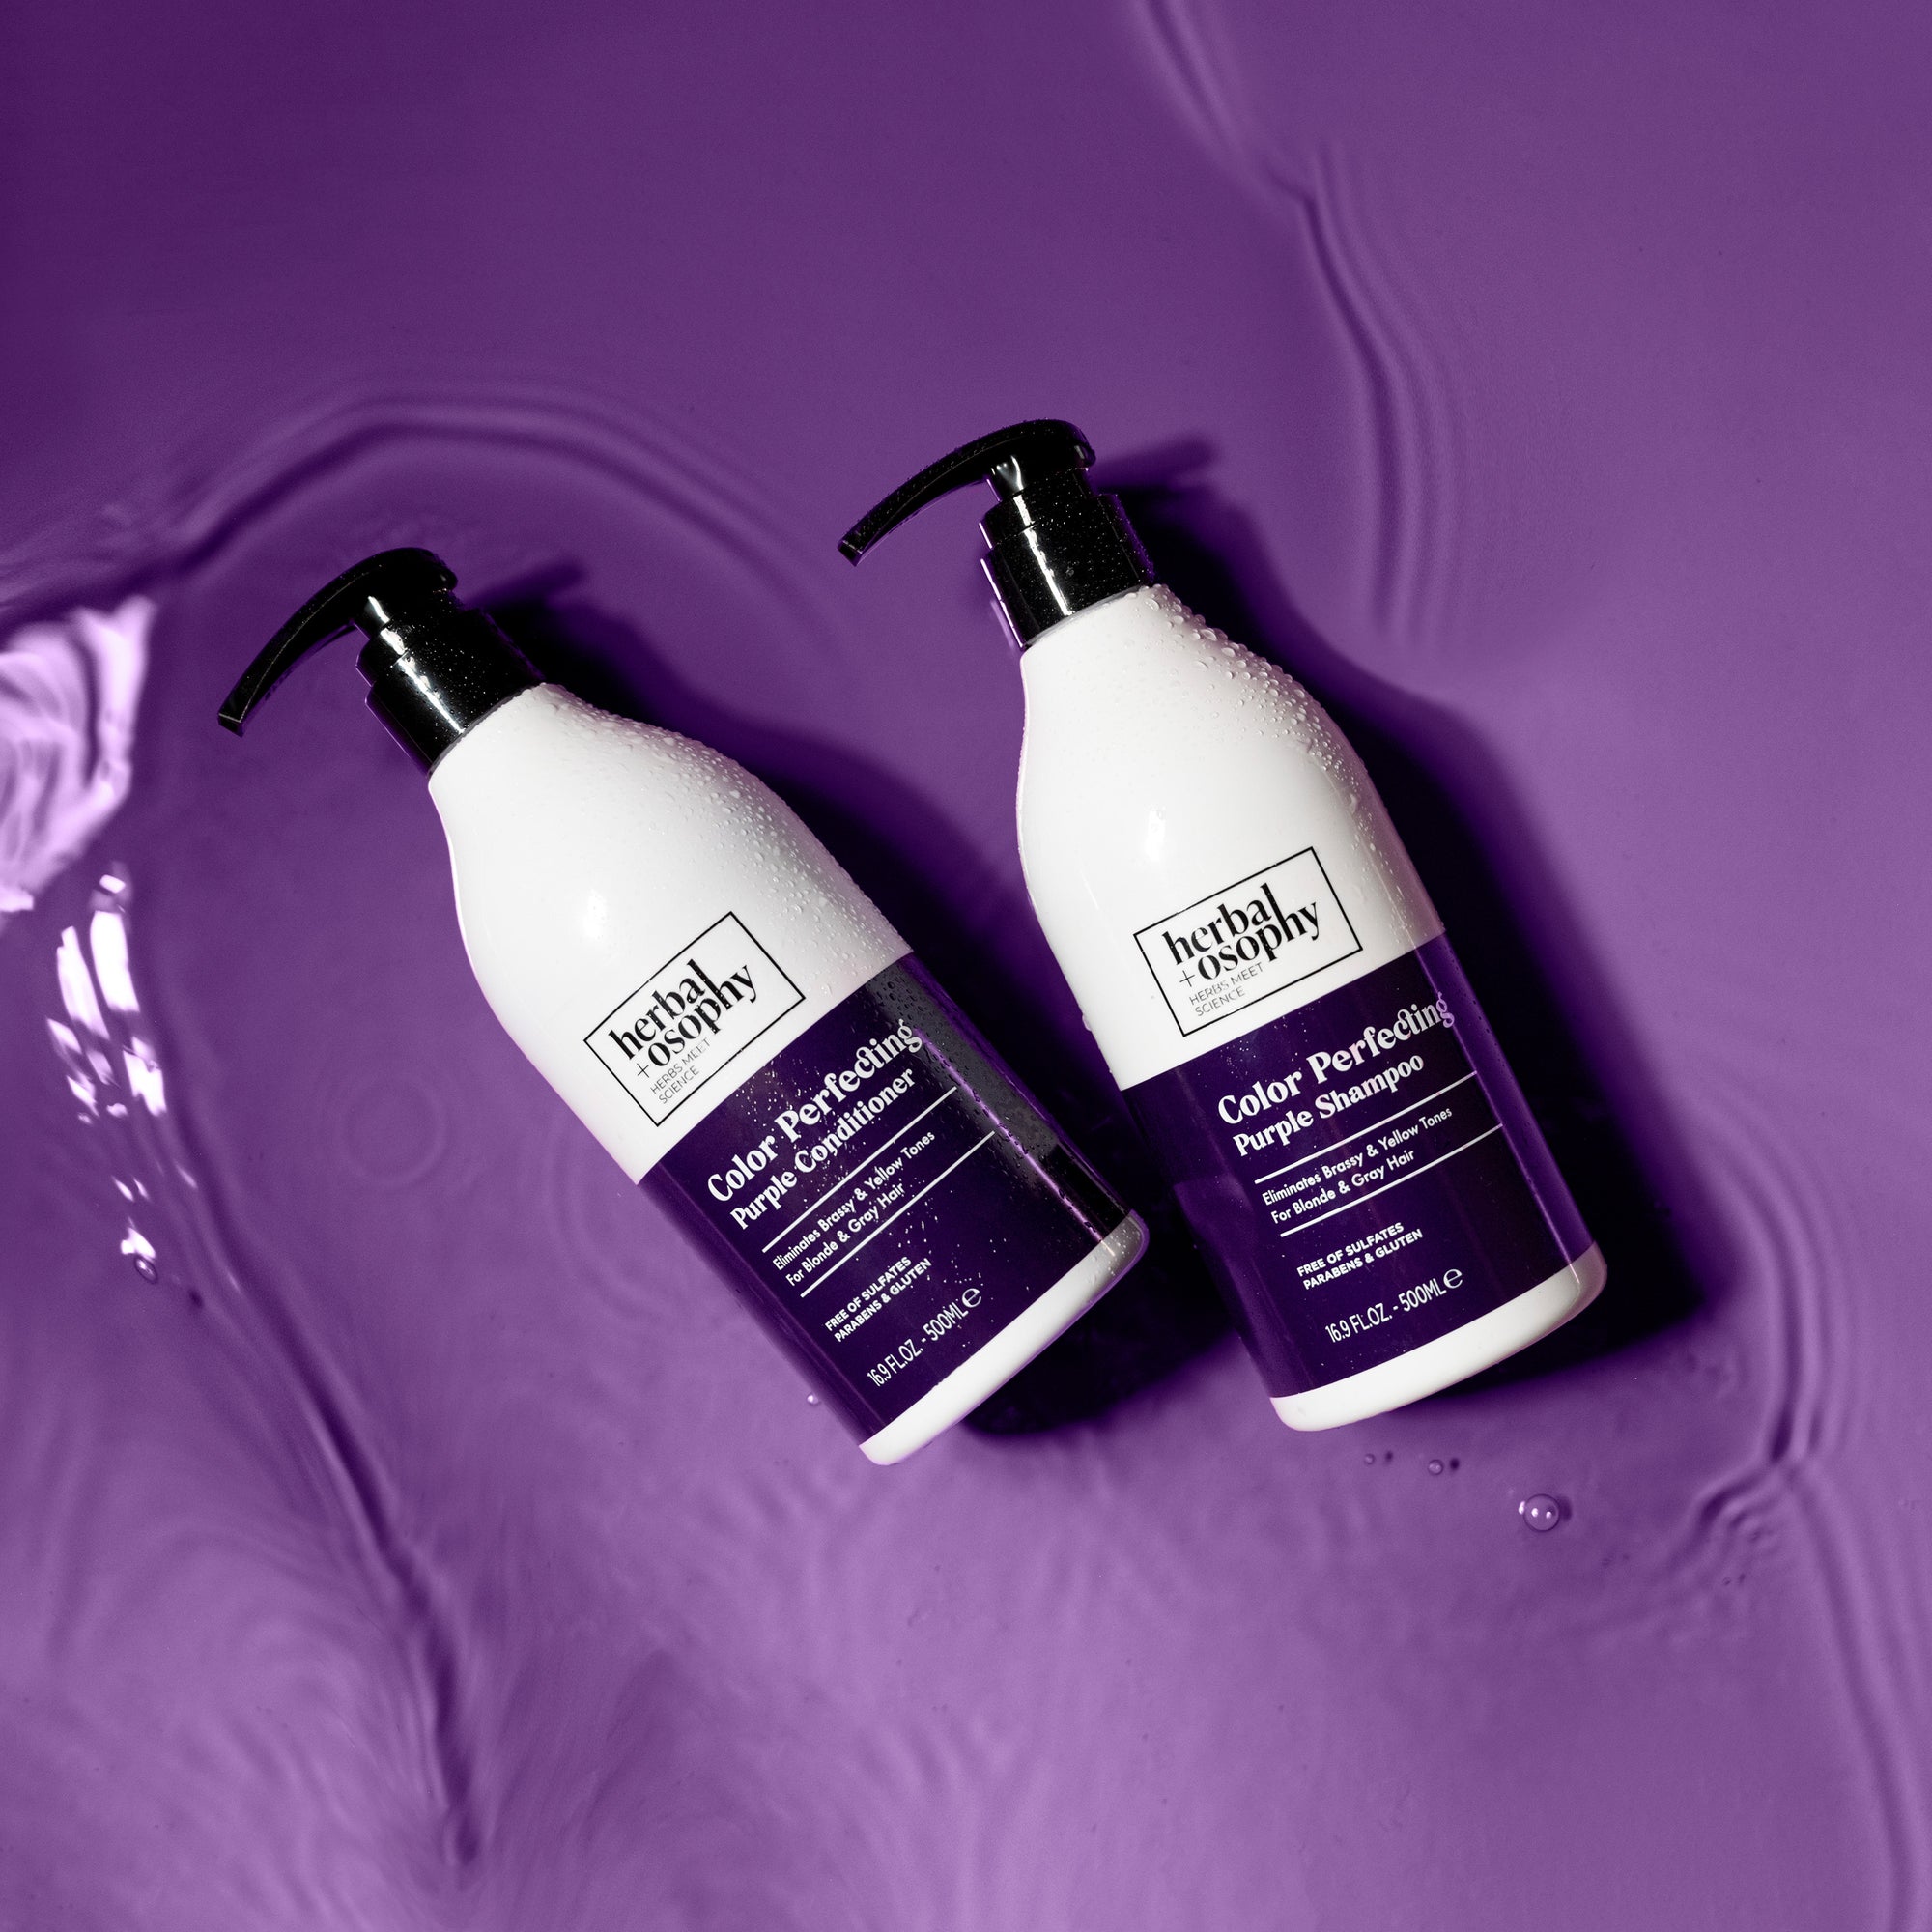 Herbalosophy Color Perfecting Purple Shampoo and Conditioner in purple rippling water